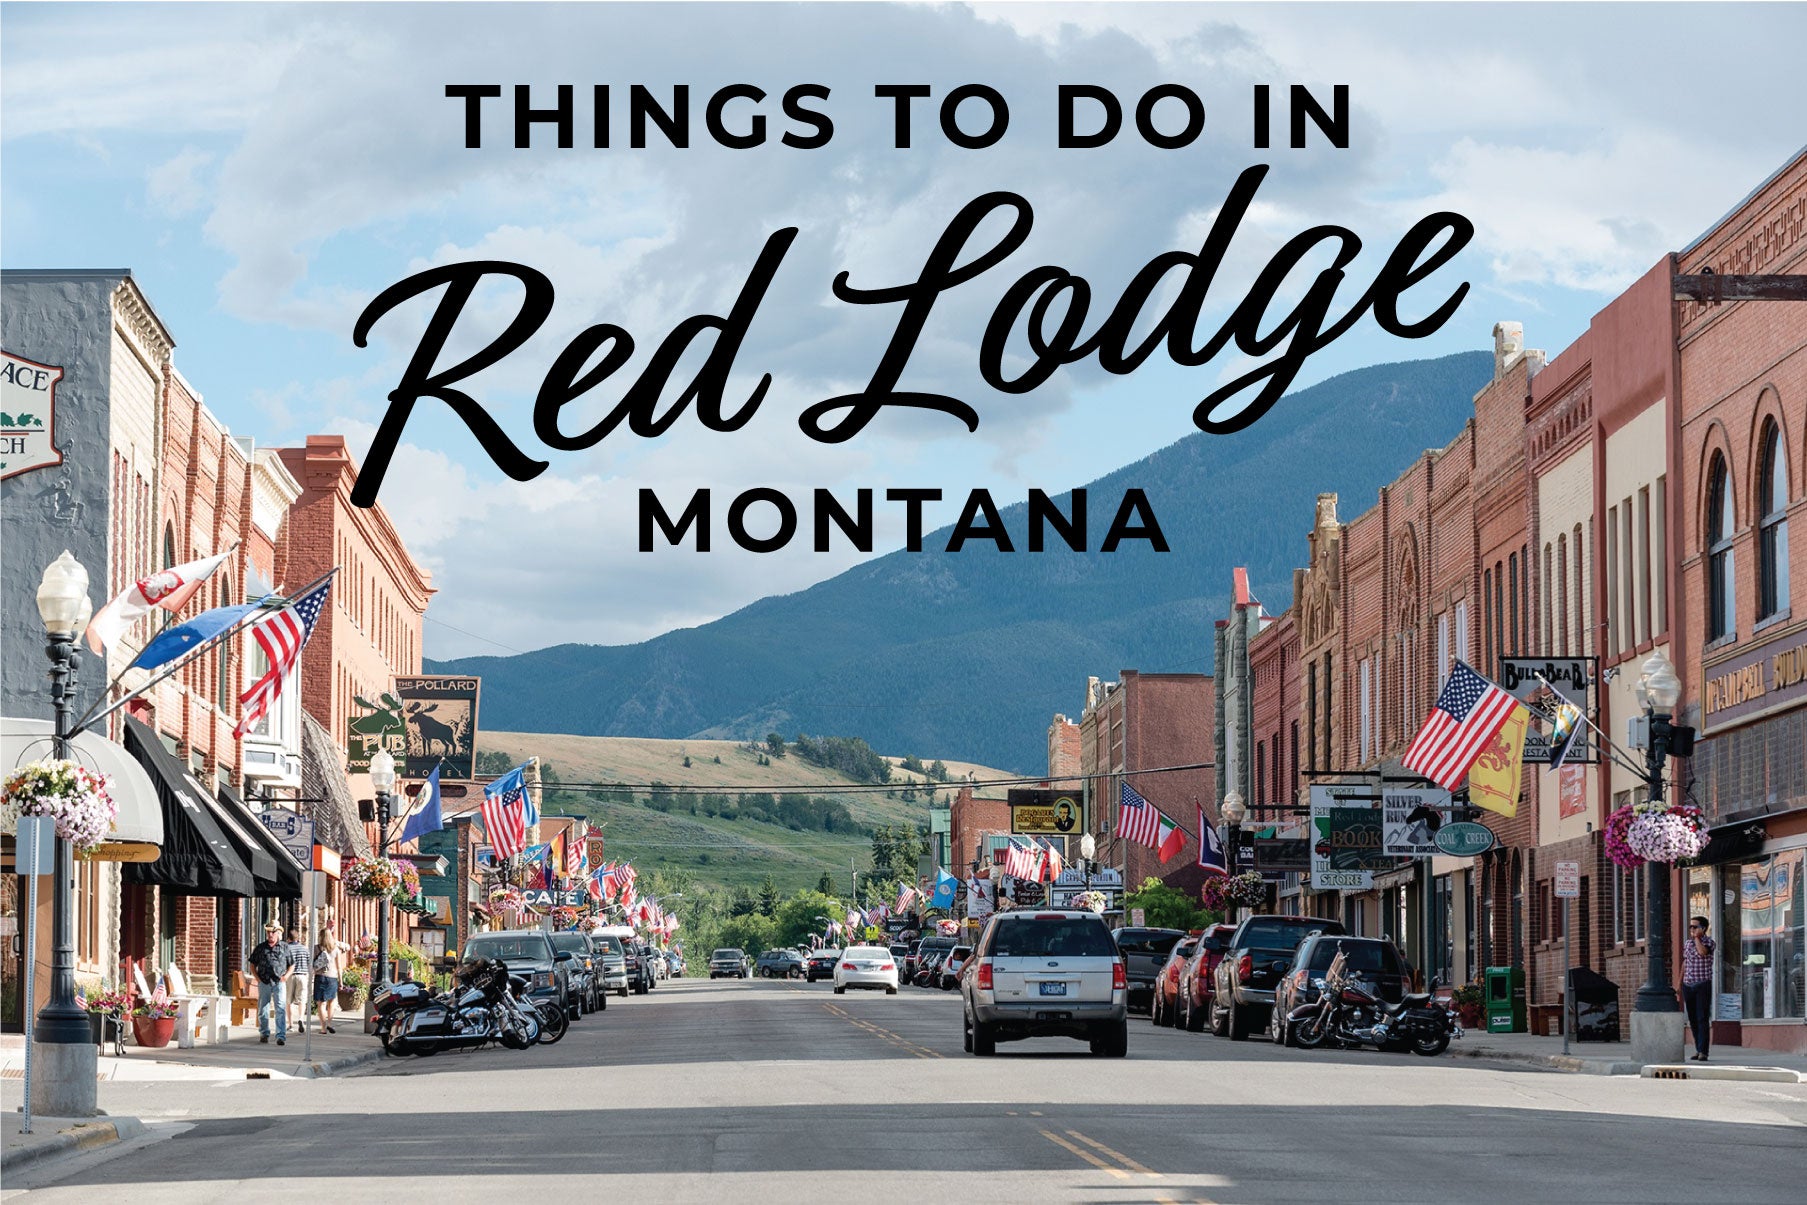 There are so many fun things to do in Red Lodge MT. Here is a locals guide to what those are!